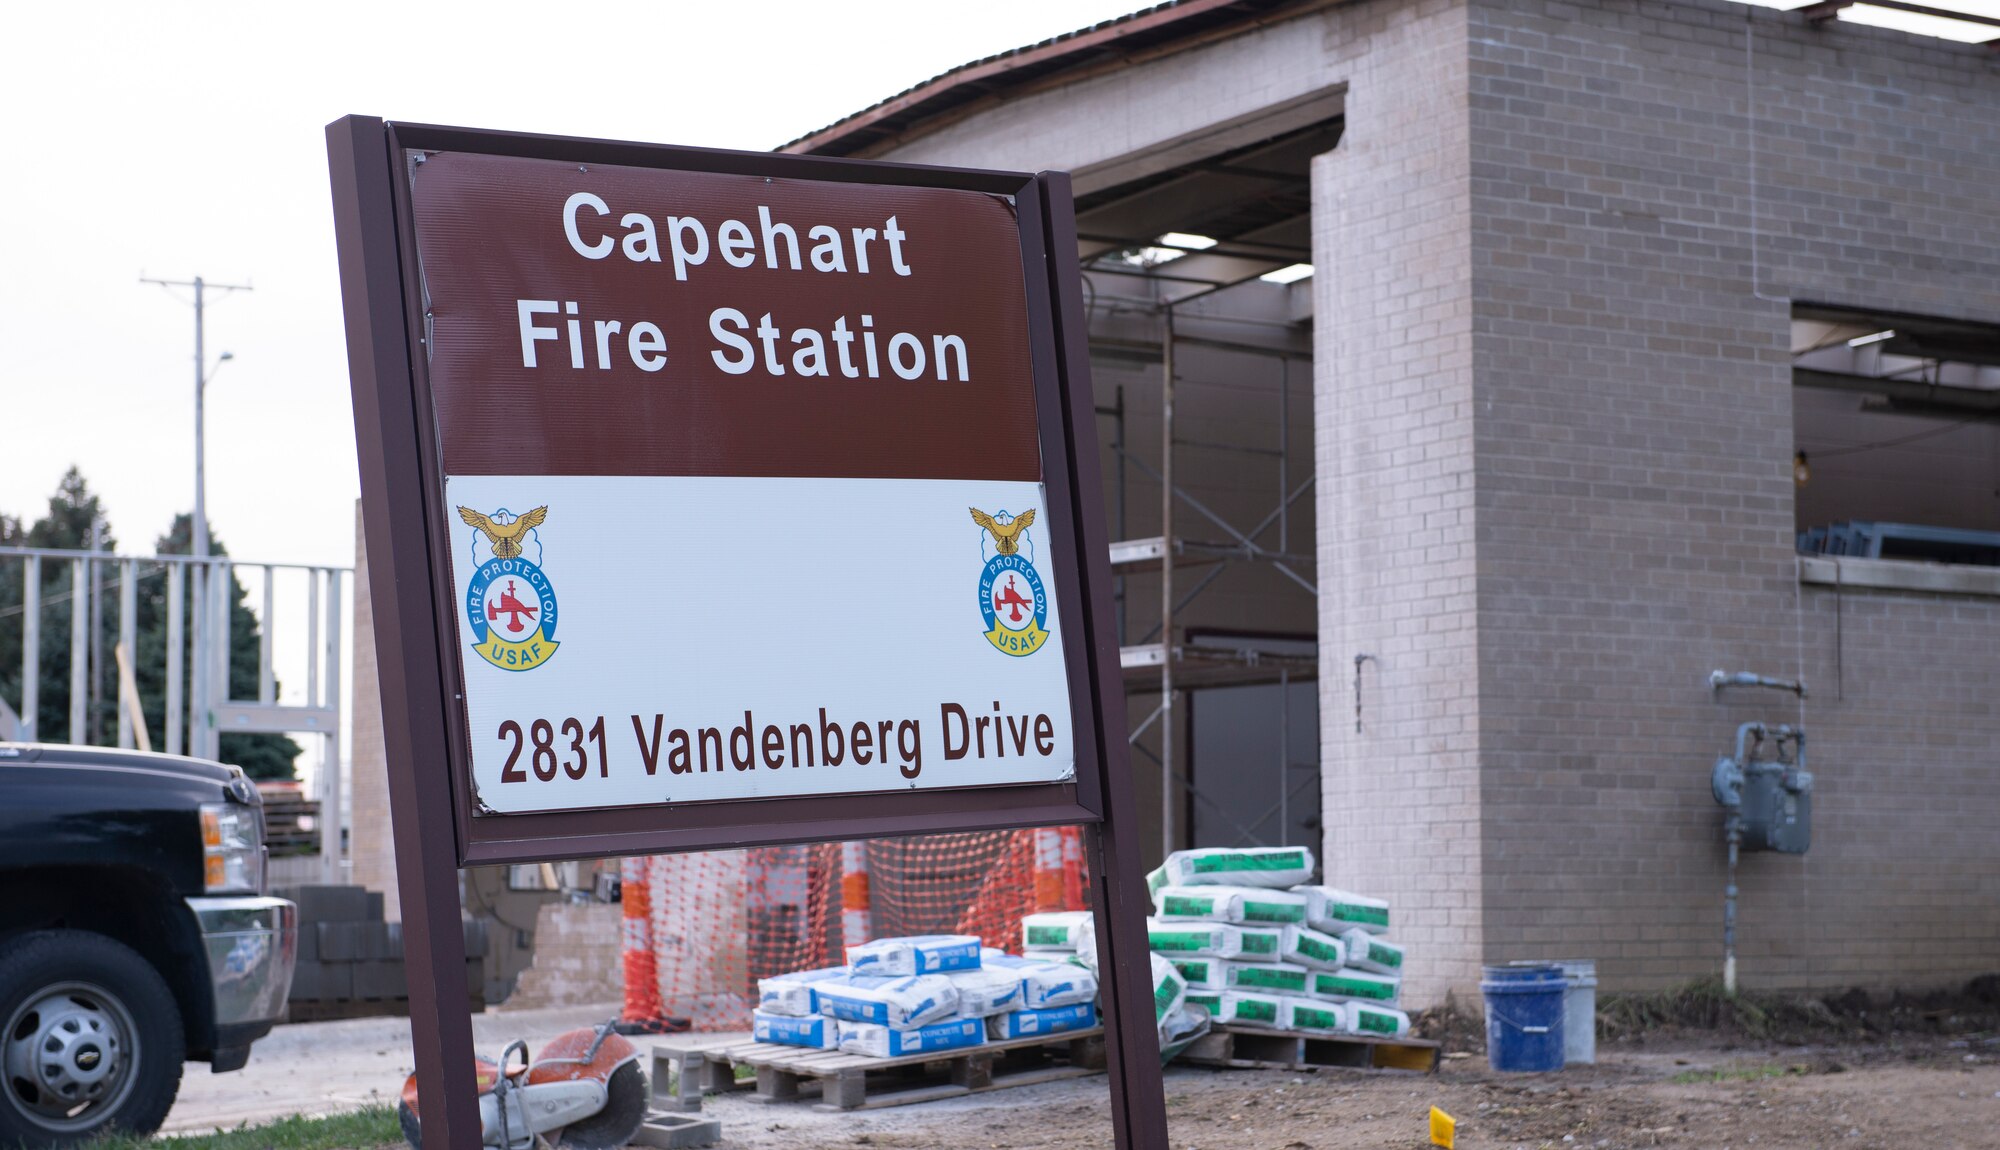 Built in May 1972, the Offutt Air Force Base Fire Station 2 is currently undergoing a $1.3 million renovation. The facility project is being funded by 55th Civil Engineer Squadron. The project is scheduled to be completed in March 2020.